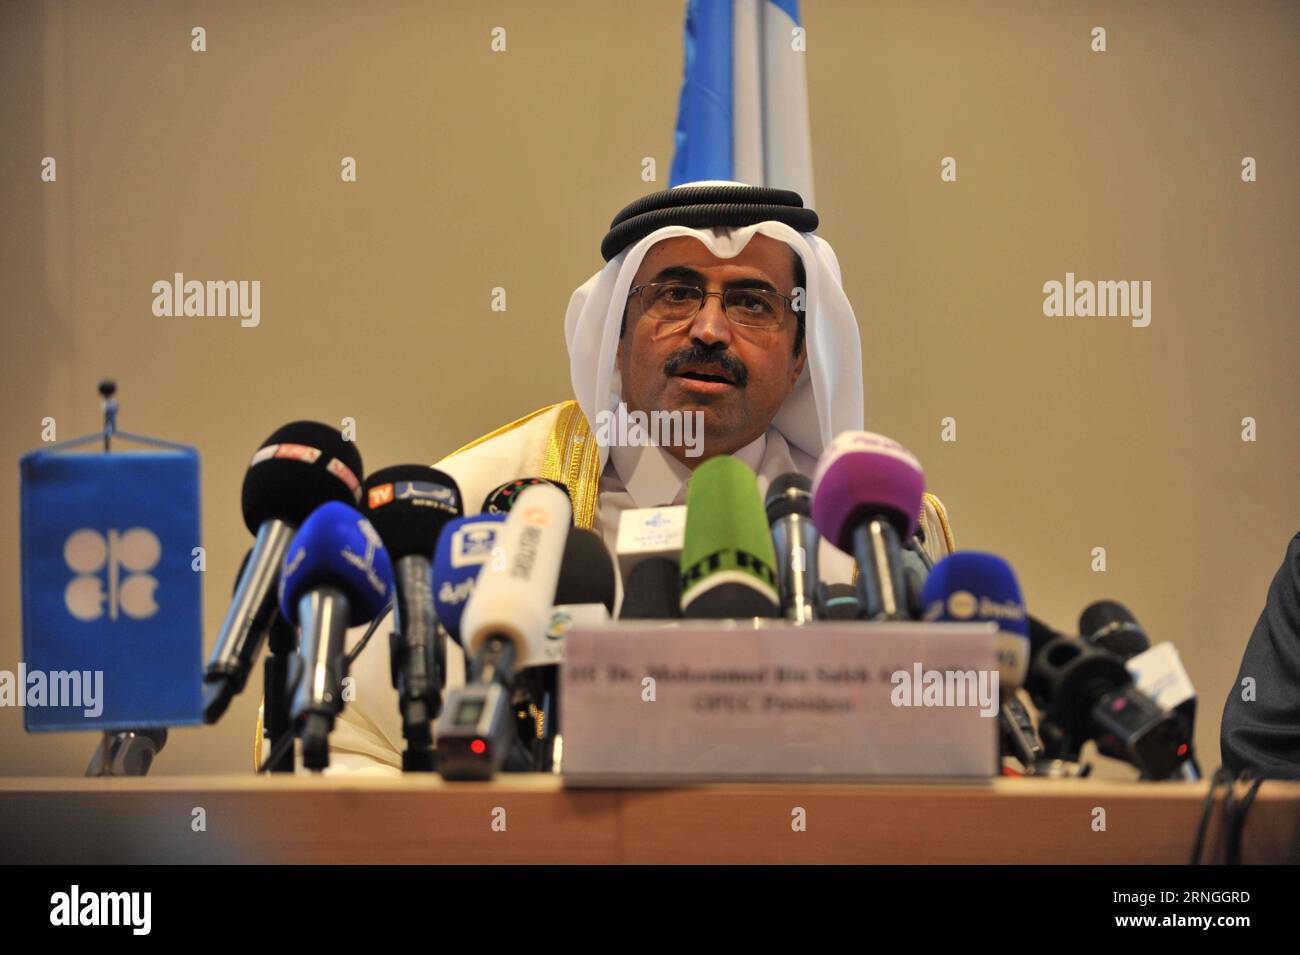 Opec-Staaten einigen sich auf Fördergrenze (160928) -- ALGIERS, Sept. 28, 2016 () -- President of Organization of Petroleum Exporting Countries (OPEC) Mohammed Bin Saleh Al-Sada attends a press conference in Algiers, Algeria on Sept. 28, 2016. OPEC on Wednesday reached a historical agreement to ceil oil output from 33.24 million barrels a day to 32.5 or 33 million barrels a day. () ALGERIA-ALGIERS-OPEC-OUTPUT CUT Xinhua PUBLICATIONxNOTxINxCHN   OPEC States some to on   Algiers Sept 28 2016 President of Organization of Petroleum Exporting Countries OPEC Mohammed am Saleh Al Sada Attends a Press Stock Photo